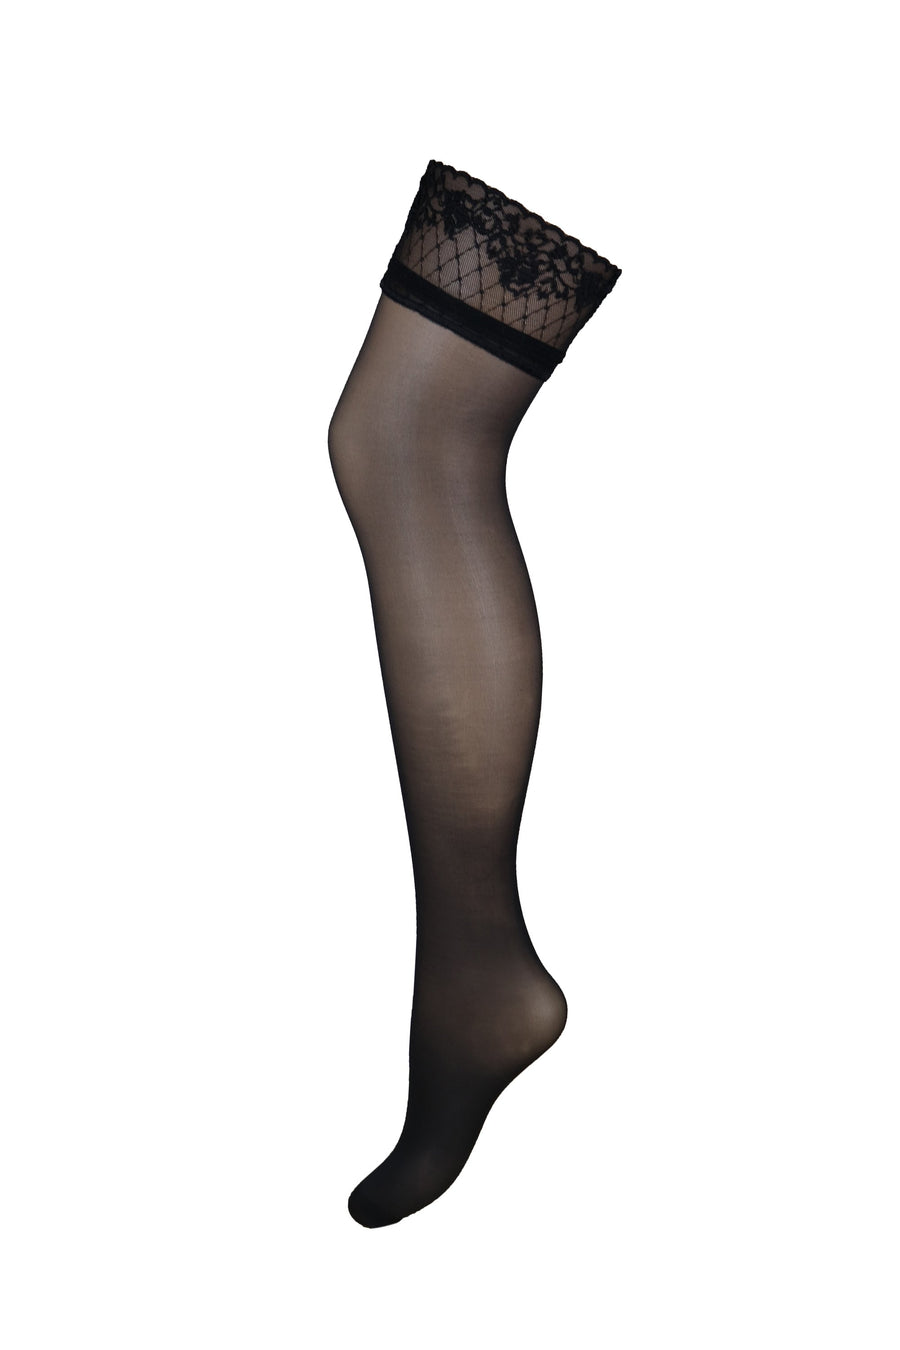 NEW Lace Top 80 Denier Sheer Hold-ups Stockings by Sentelegri ,9